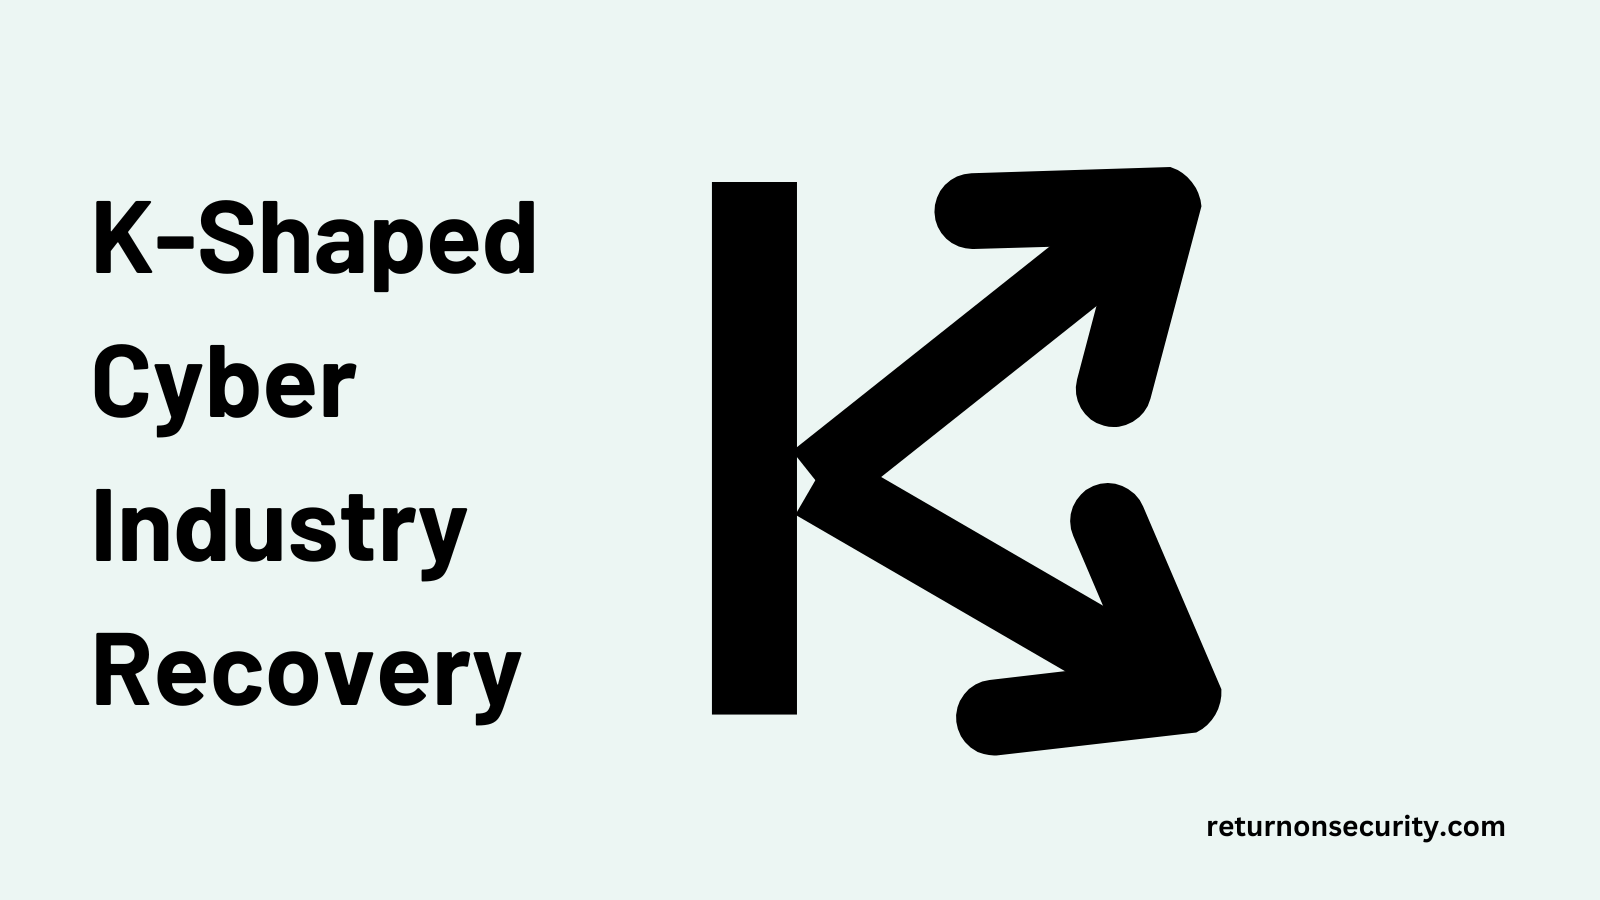 The K-Shaped Recovery of the Cybersecurity Industry